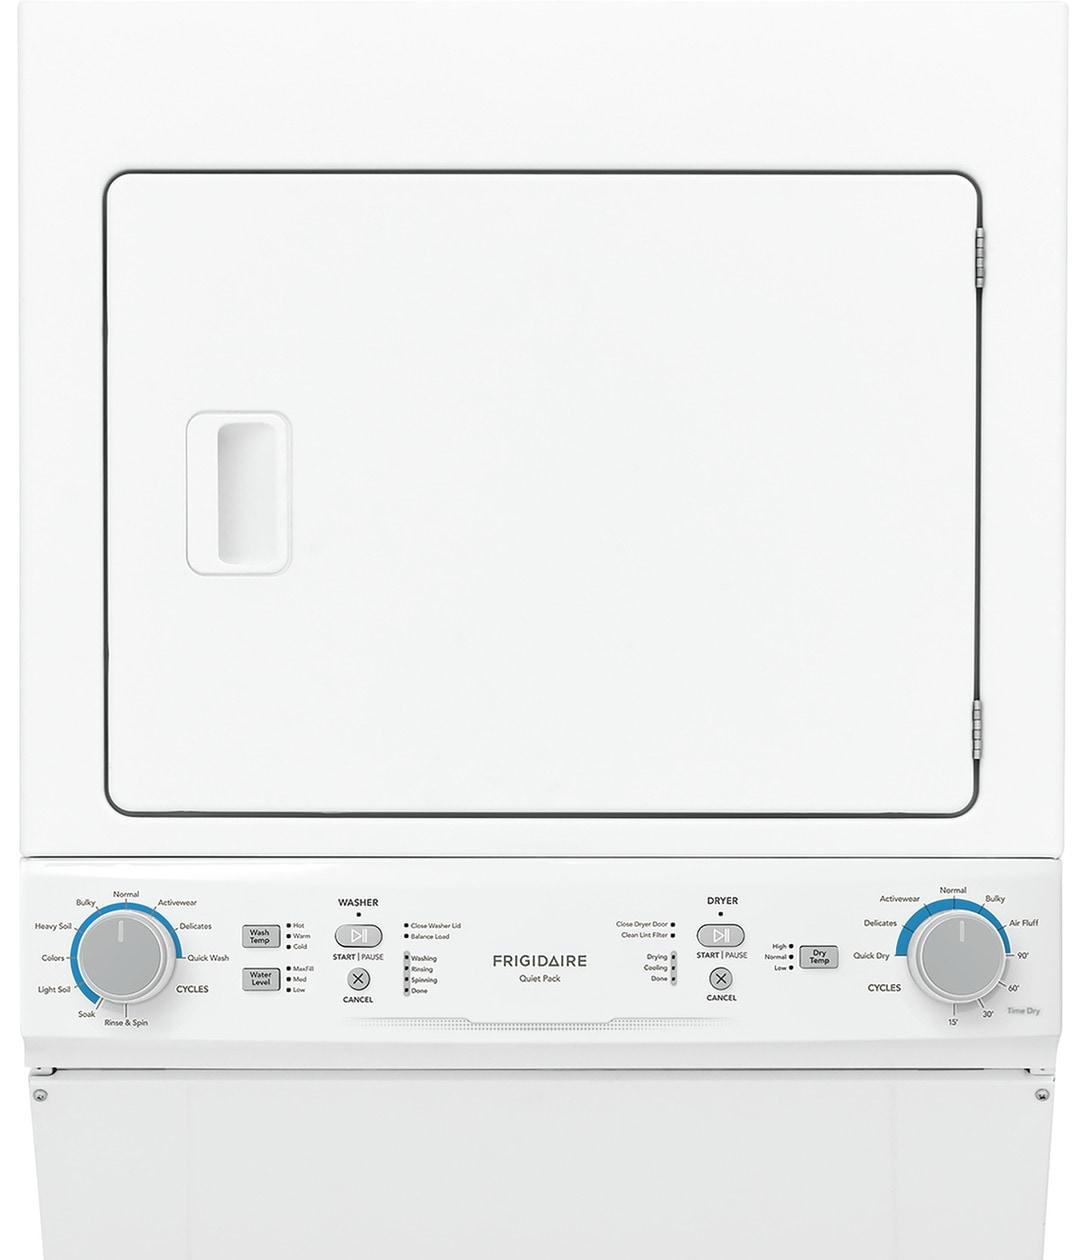 Frigidaire Gas Washer/Dryer Laundry Center - 3.9 Cu. Ft Washer and 5.5 Cu. Ft. Dryer